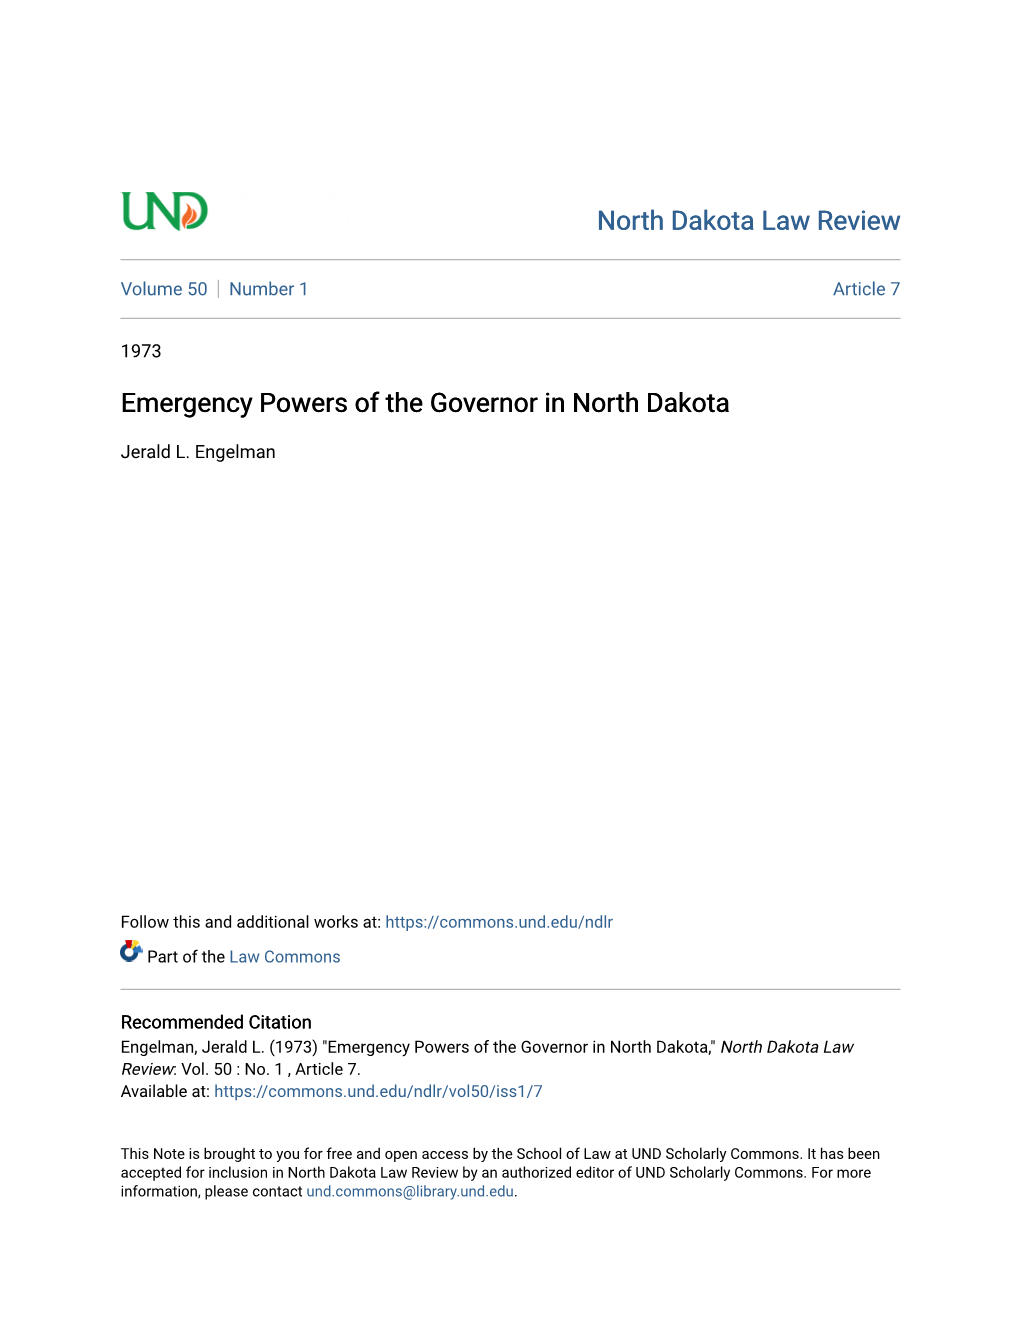 Emergency Powers of the Governor in North Dakota